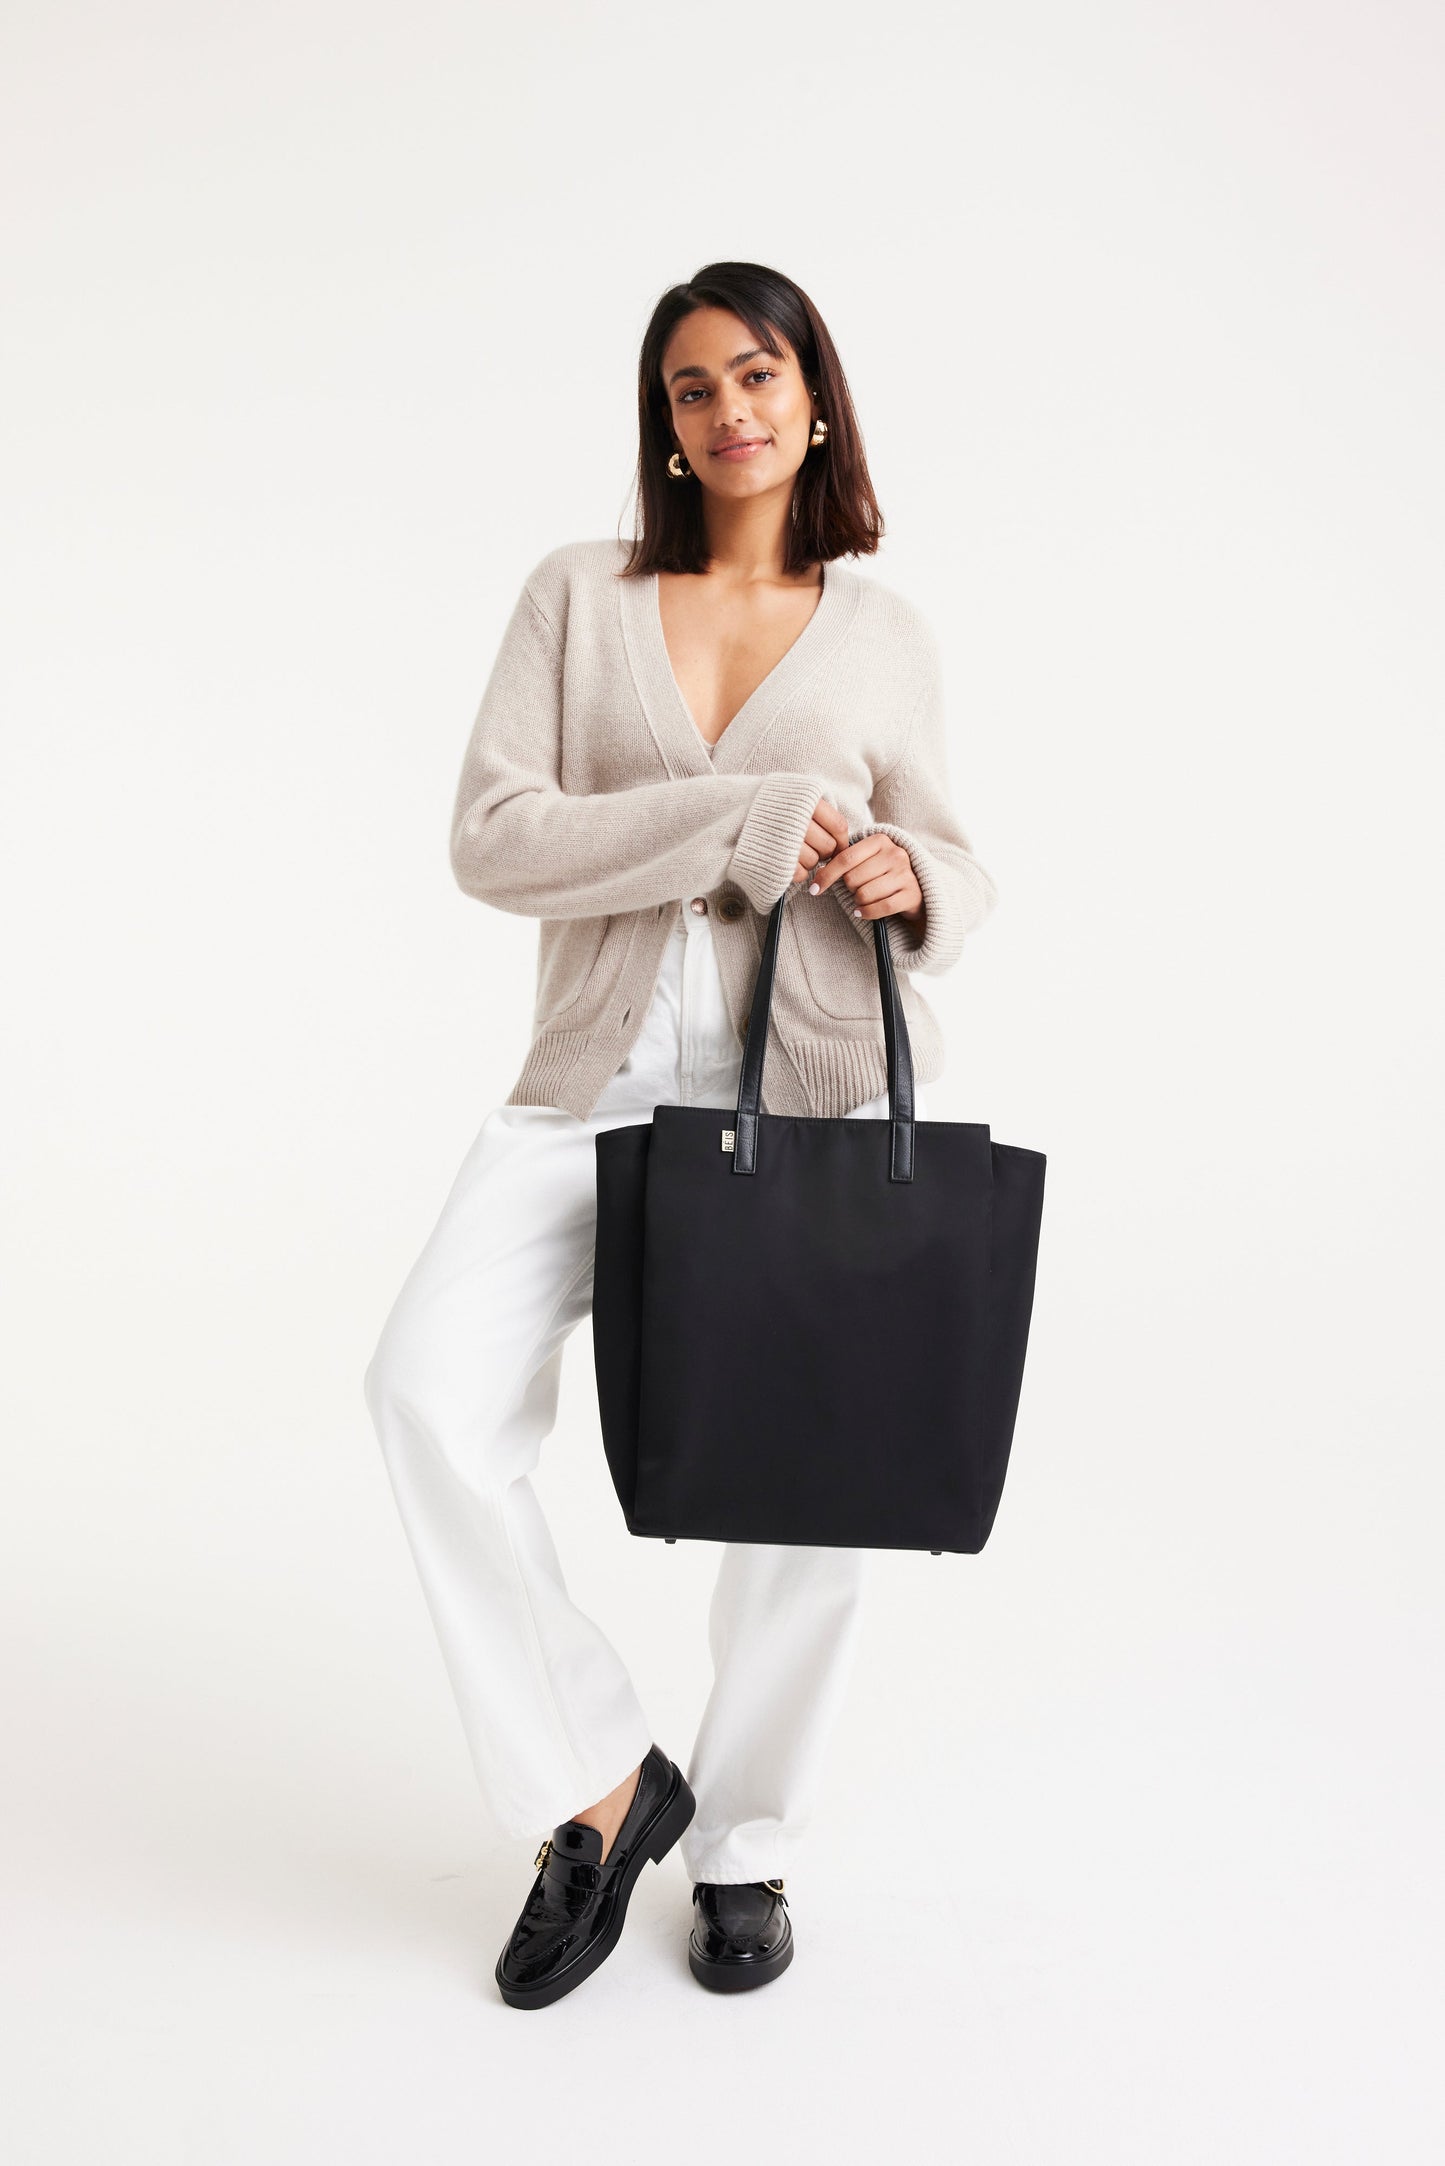 The Commuter Tote In Black